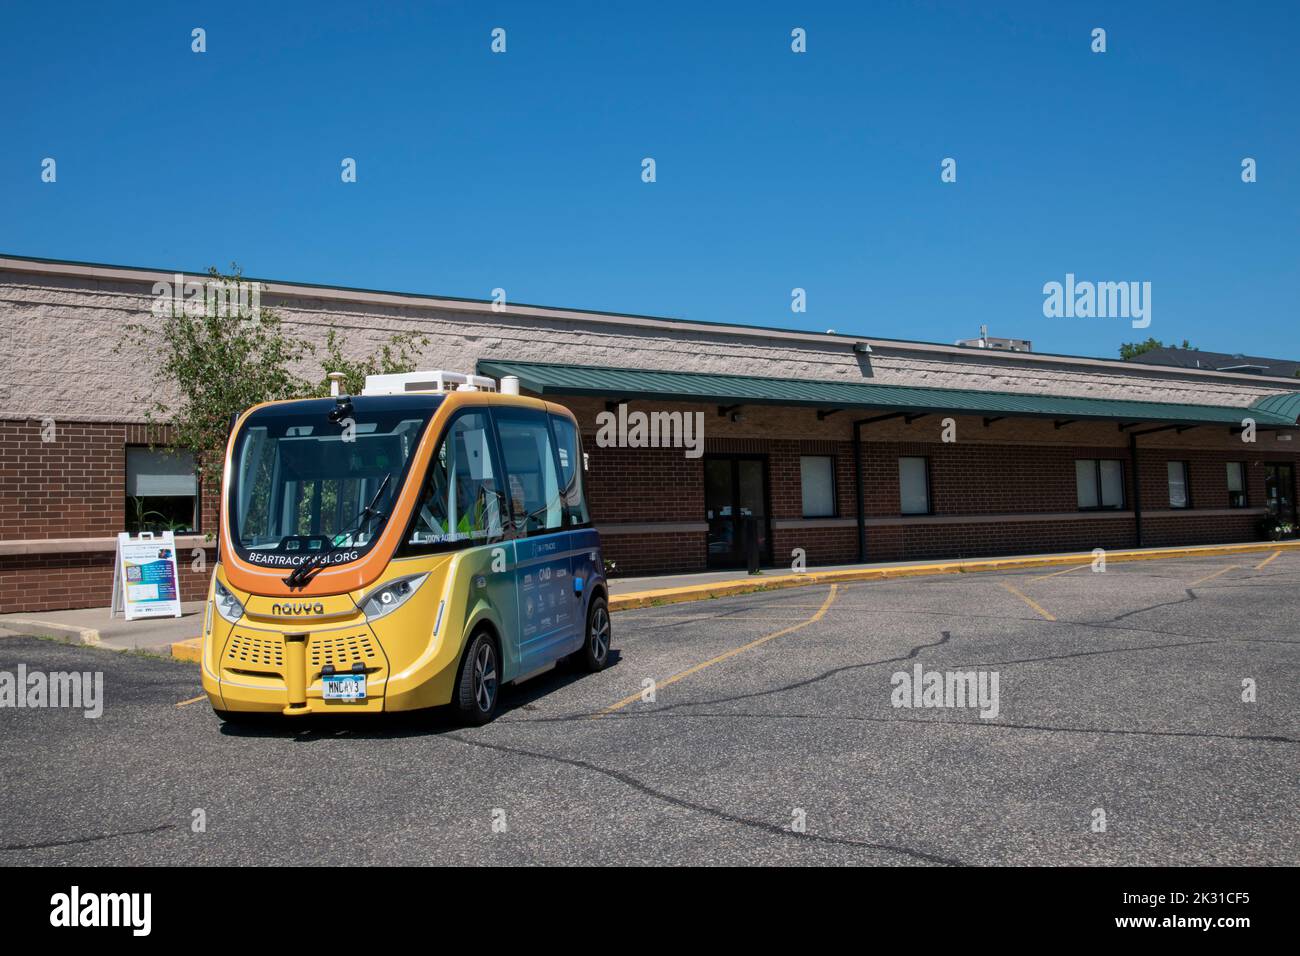 White Bear Lake, Minnesota. August 9 2022. A self-driving low speed multi-passenger electric shuttle. Bear Tracks is a research and demonstration proj Stock Photo